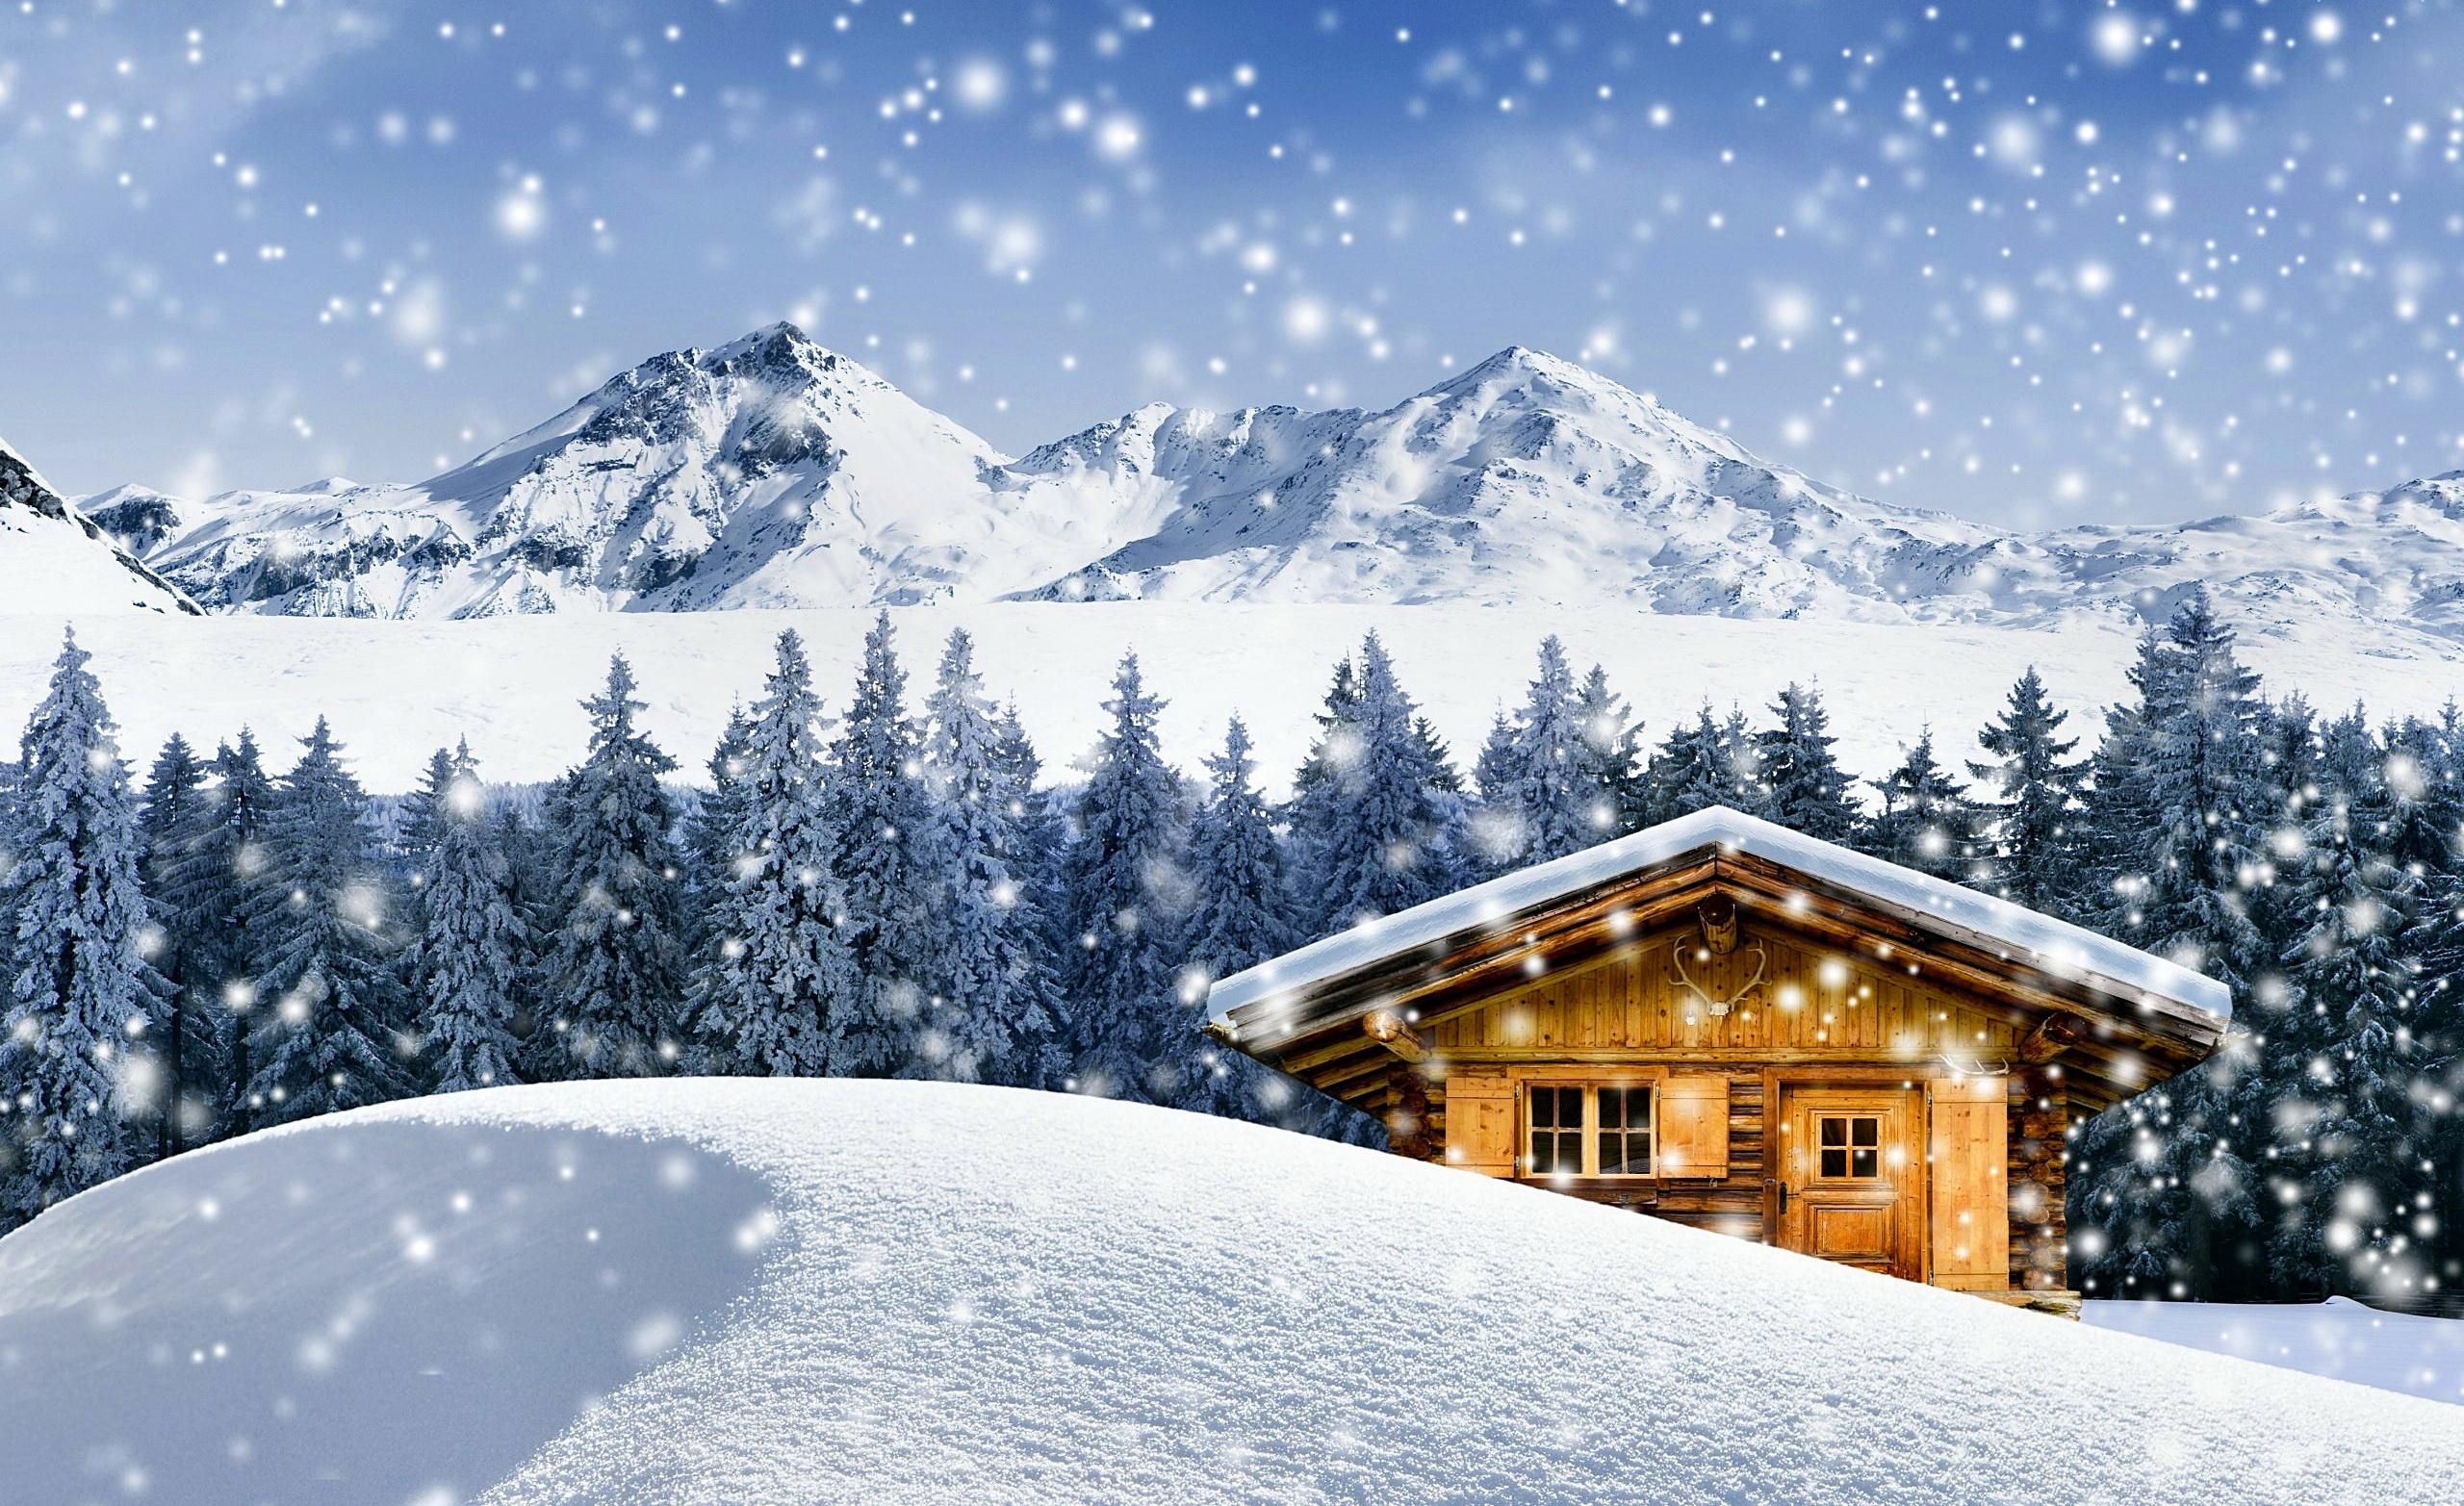 winter cottage pictures | HD Dream winter cottage Wallpaper | winter ...